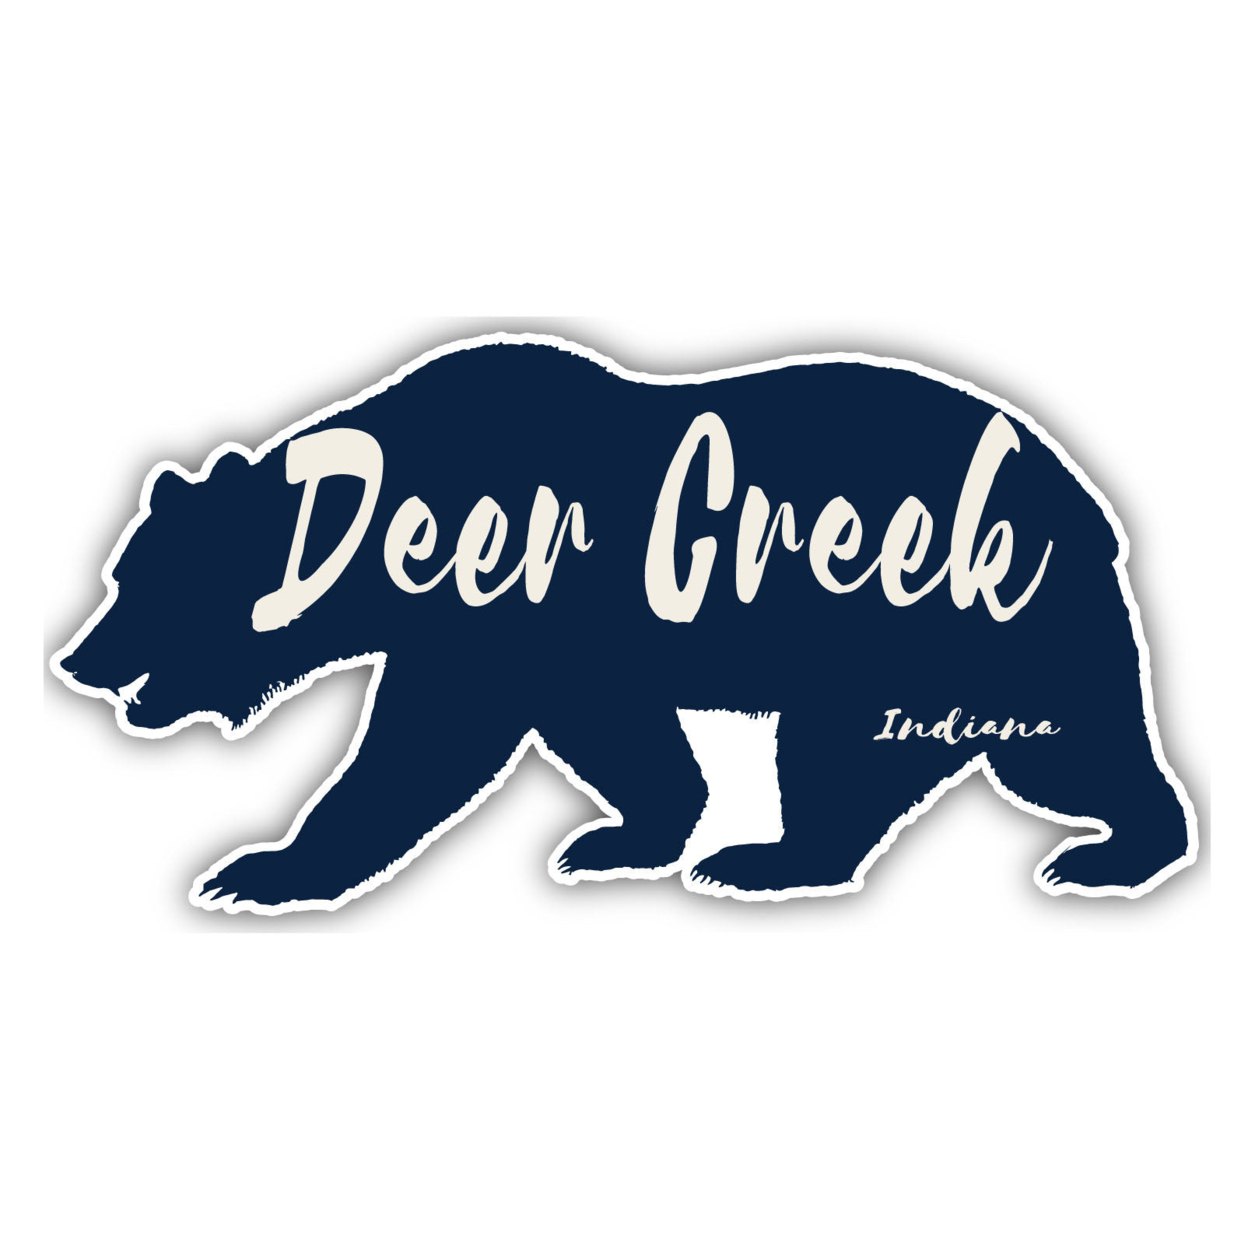 Deer Creek Indiana Souvenir Decorative Stickers (Choose Theme And Size) - 4-Pack, 2-Inch, Bear